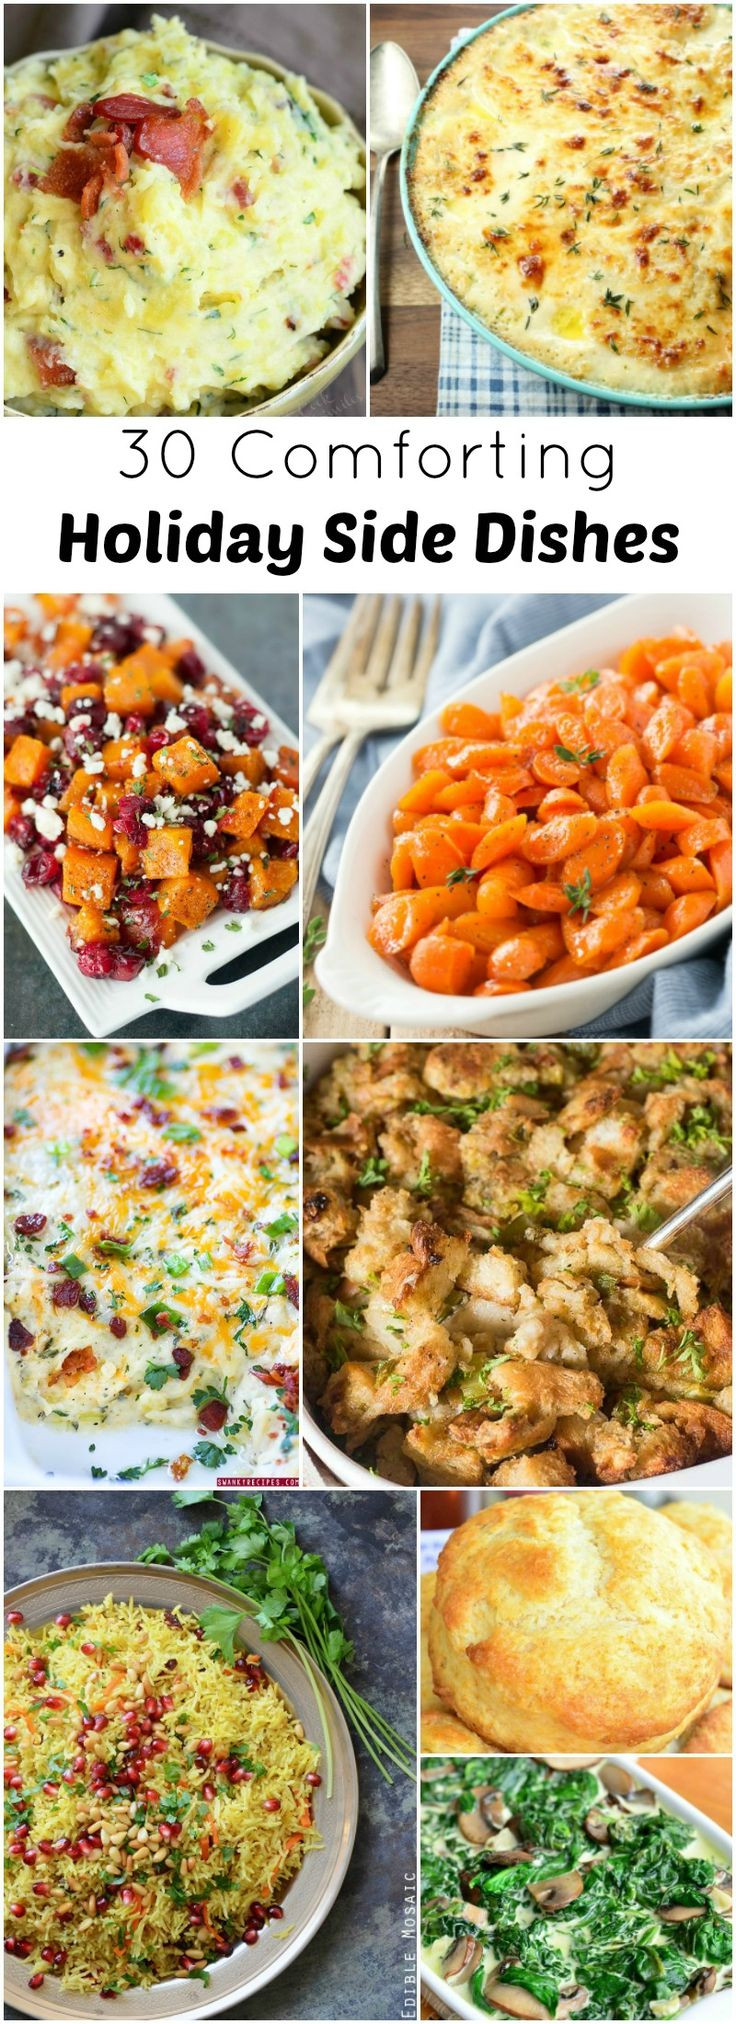 Side Dishes For Christmas Dinner
 17 Best ideas about Holiday Side Dishes on Pinterest